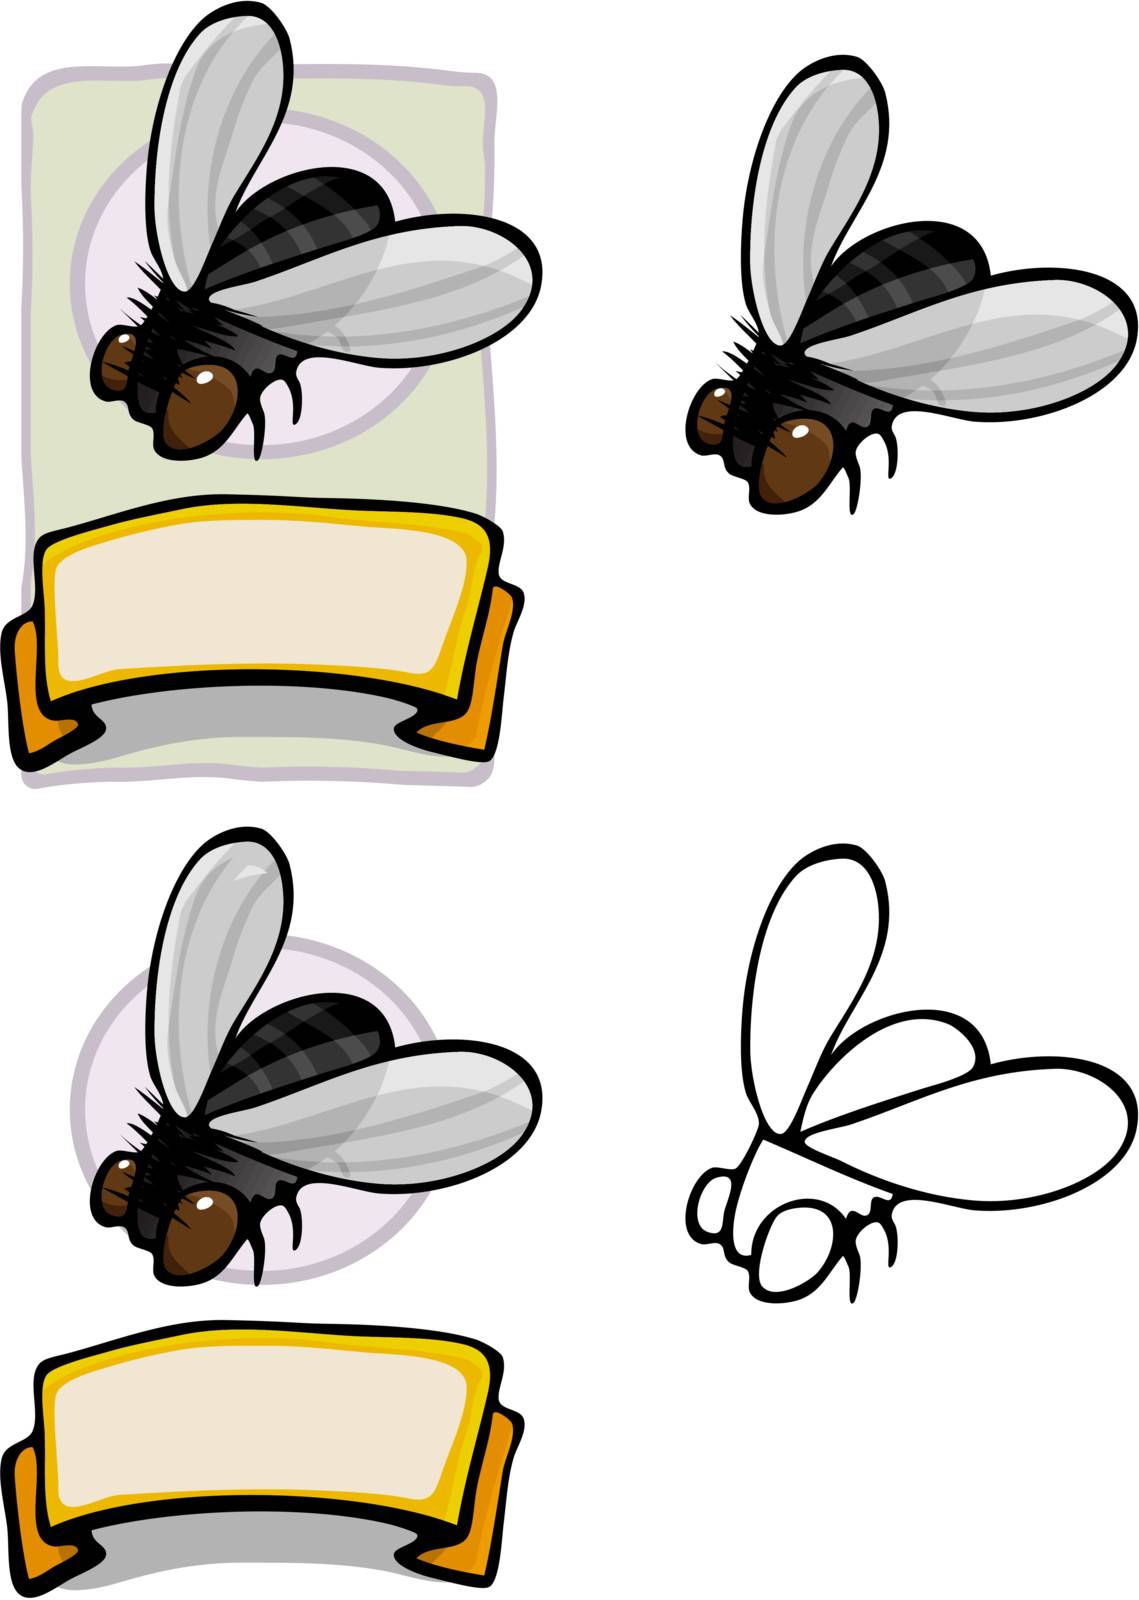 Variations of a housefly brand logo and label for all types of use.